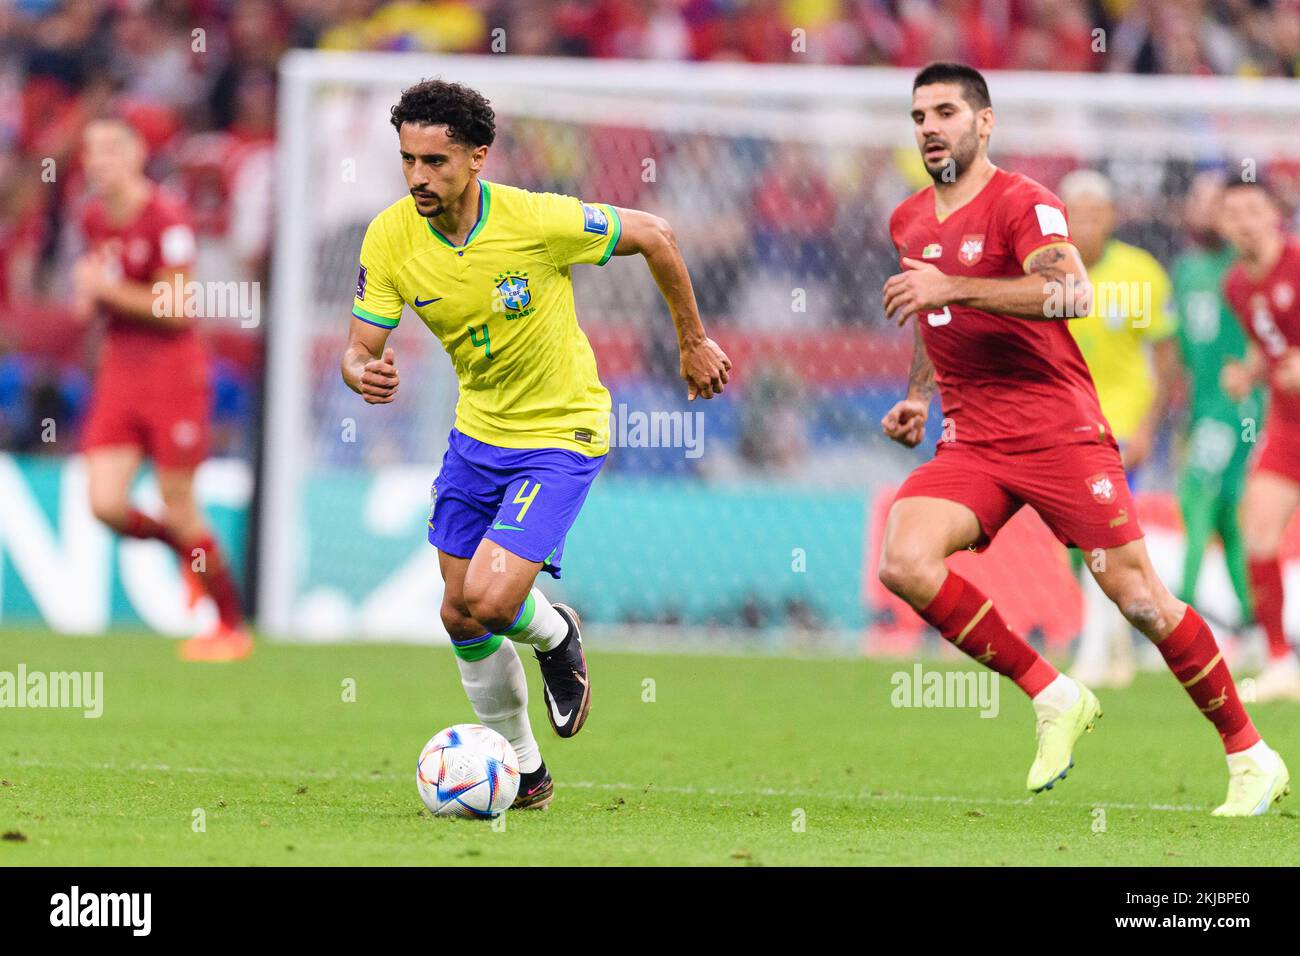 Lusail, Qatar. 24th Nov, 2022. Lusail, Qatar, Nov 25th 2022: Marquinhos do Brasil during a match between Brazil vs Serbia, valid for the group stage of the World Cup, held at the Lusail National Stadium in Lusail, Qatar. (Marcio Machado/SPP) Credit: SPP Sport Press Photo. /Alamy Live News Stock Photo